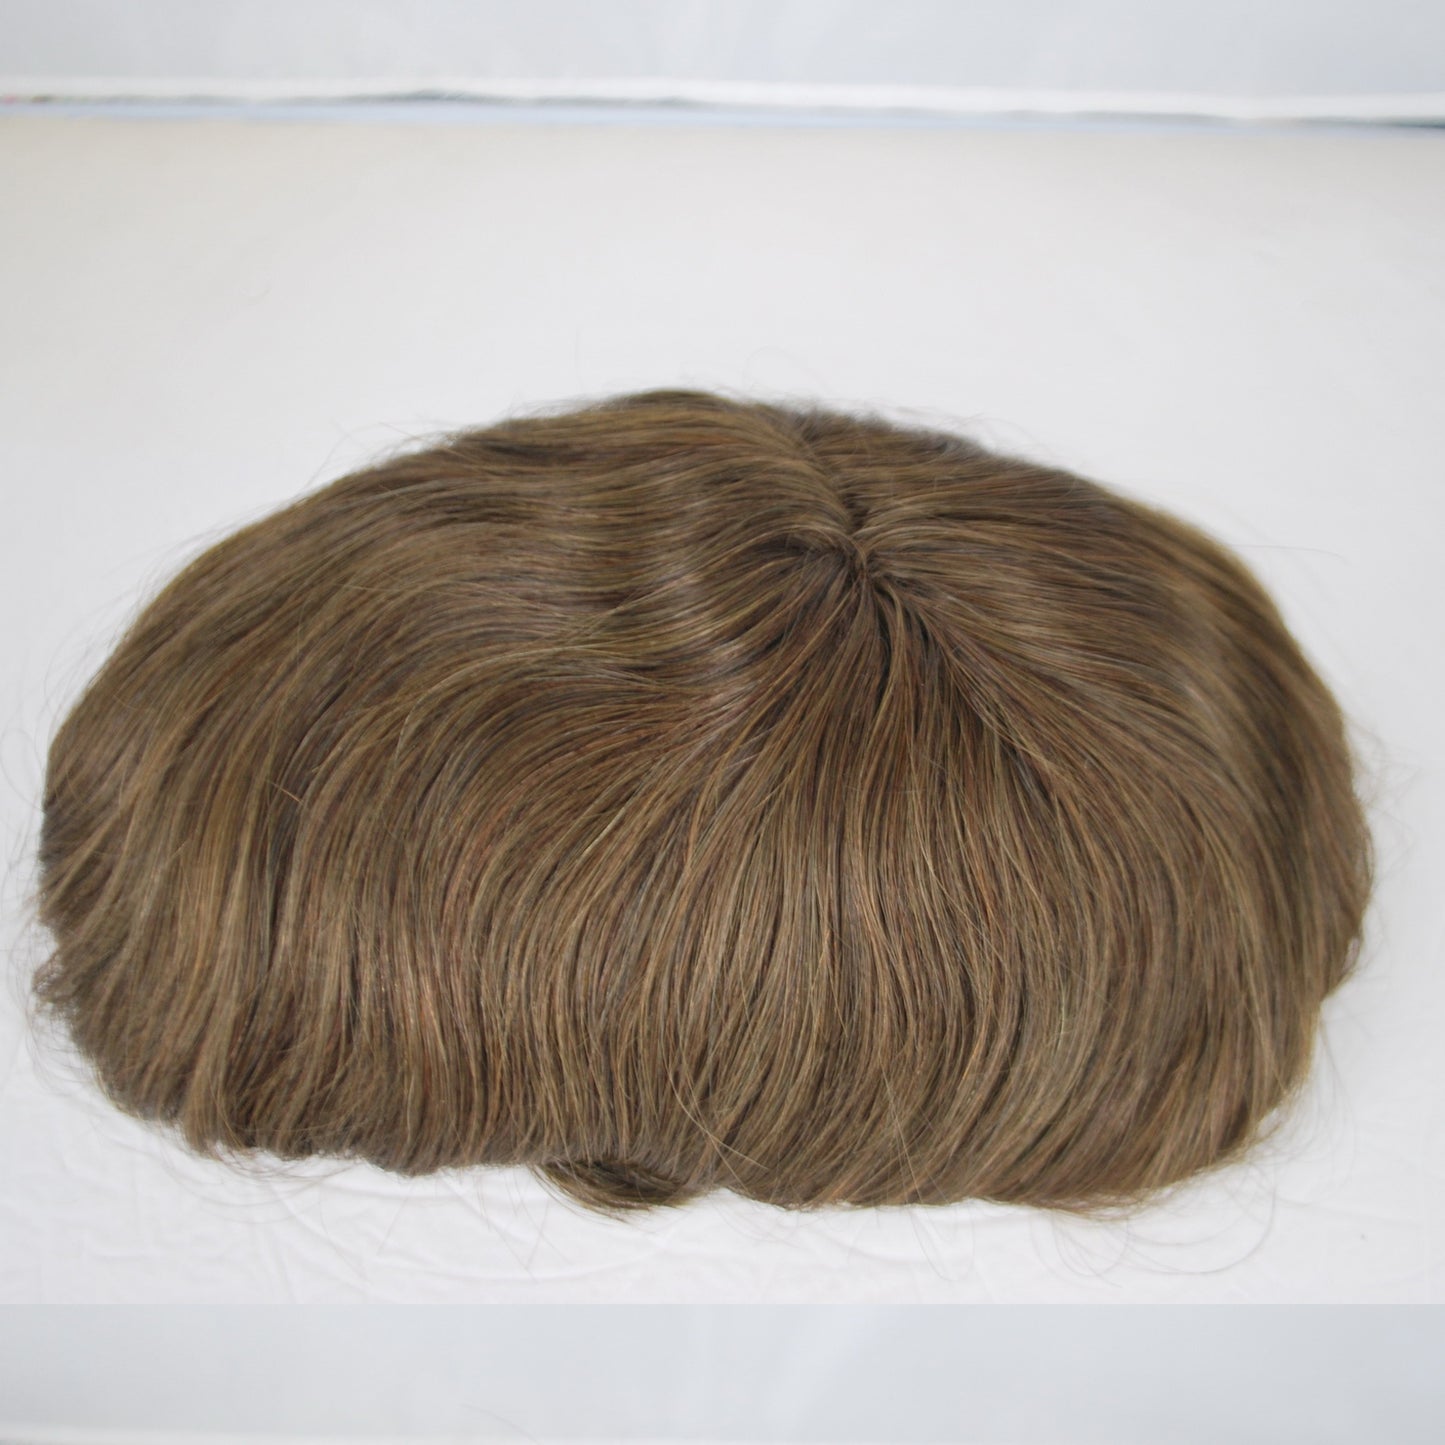 Clearance#4 medium brown toupee for old man 9.5x6.5" French lace  men's hair piece